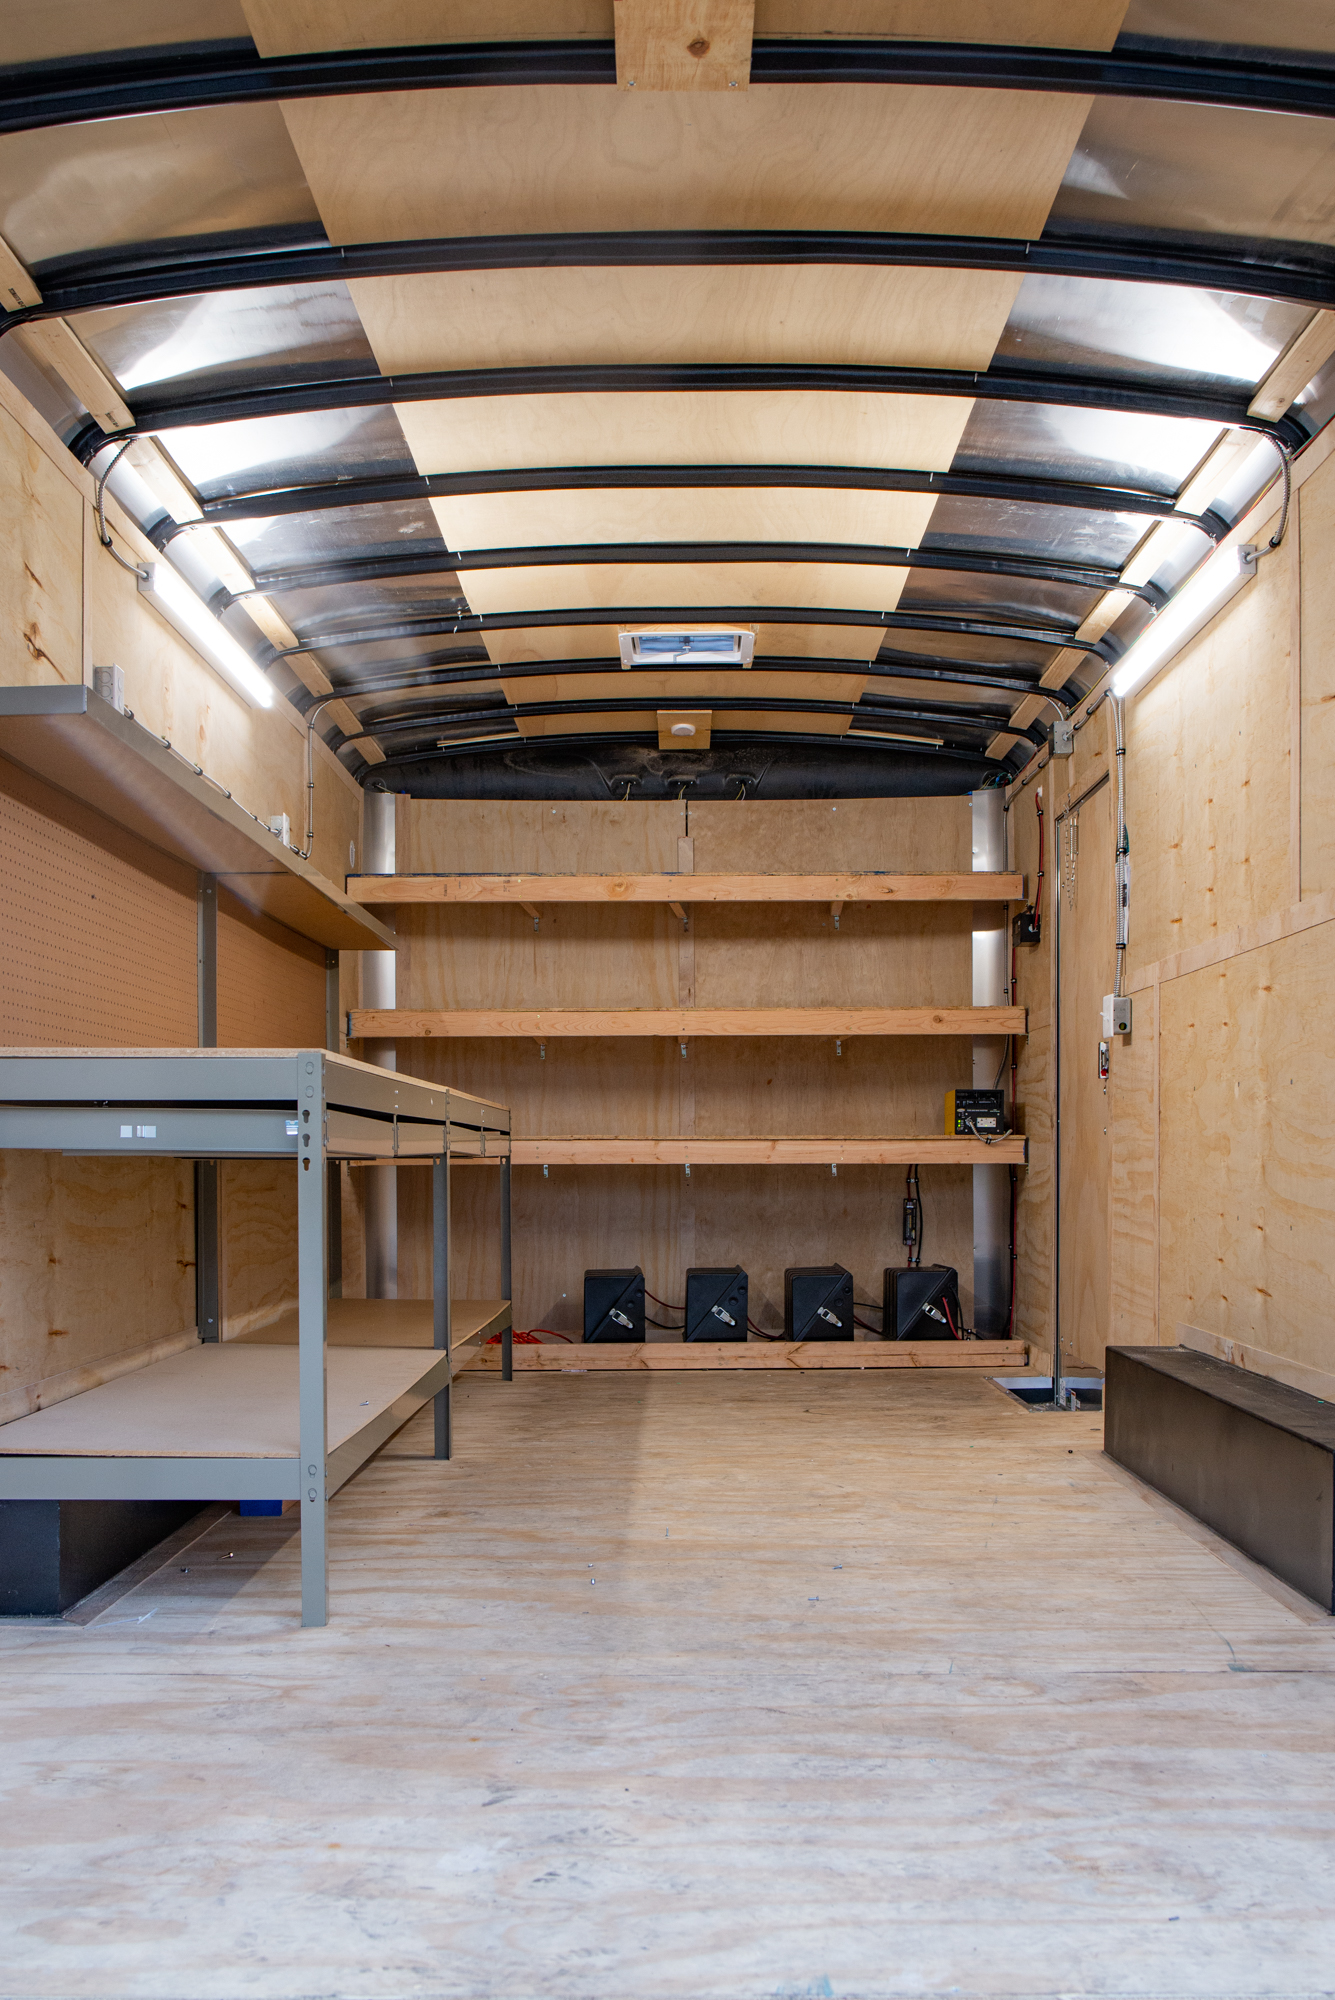 Inside of an enclosed trailer